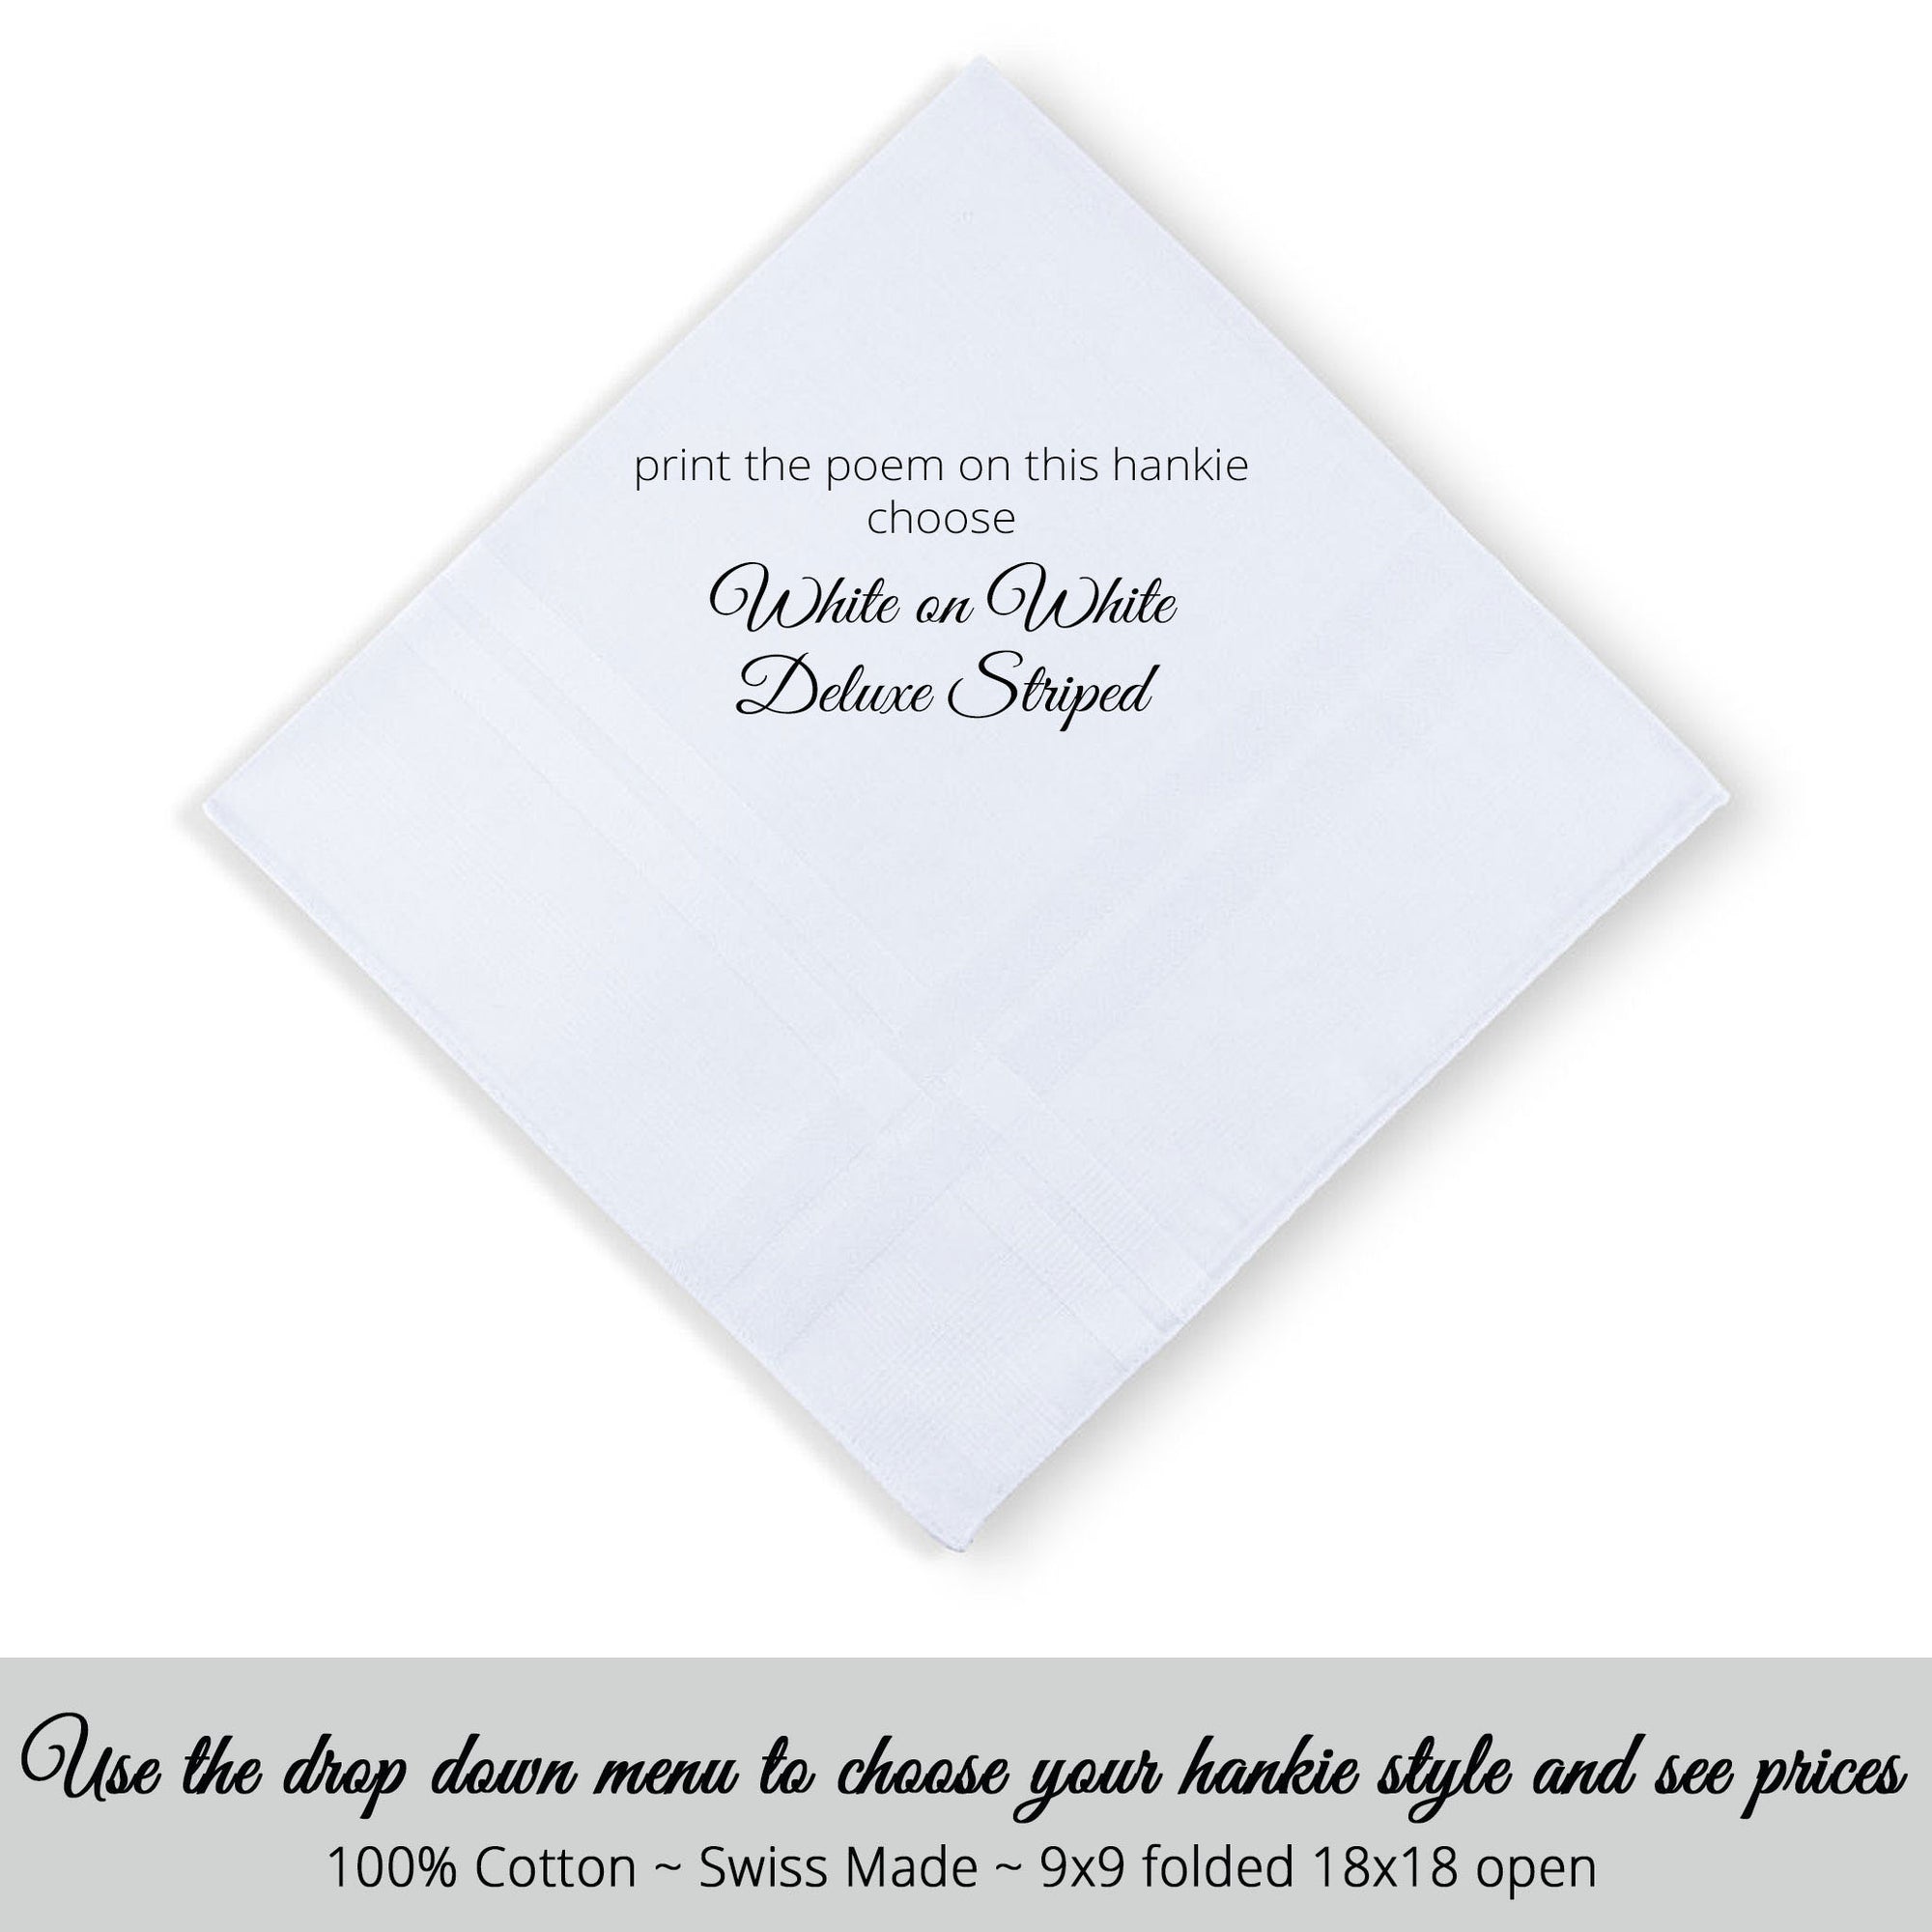 Father of the groom gift.  Masculine Hankie style Swiss made deluxe striped